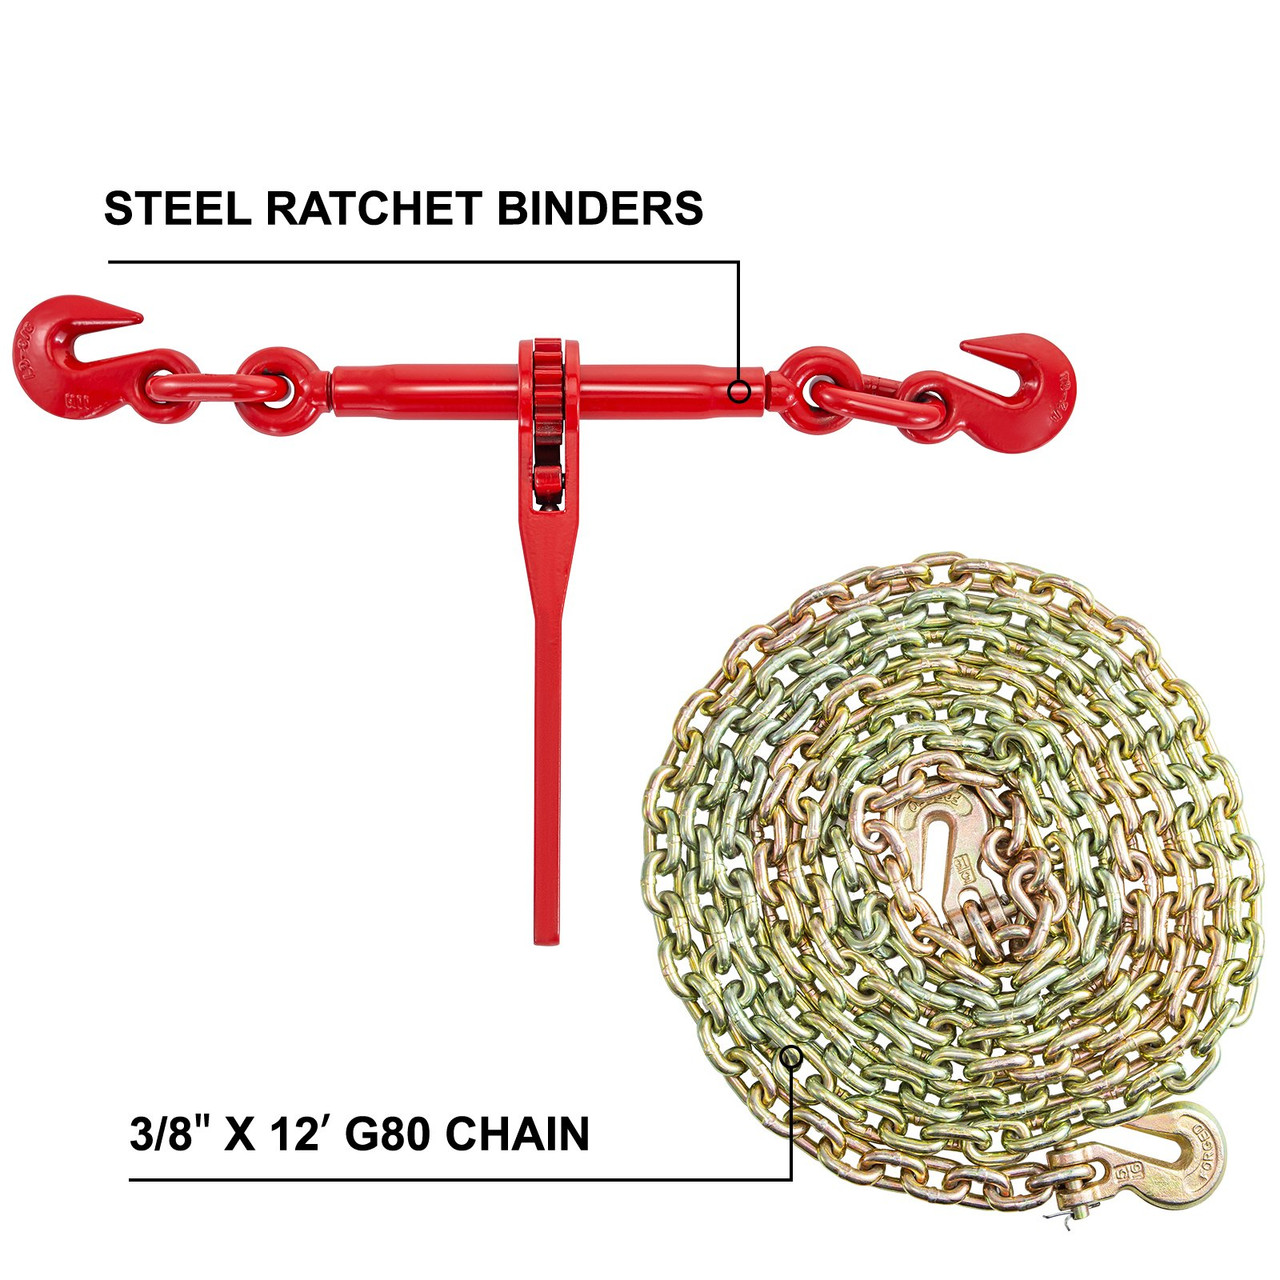 Chain and Binder Kit 3/8in-1/2in, Ratchet Load Binders 9215lbs Working Strength, Ratchet Binders and Chains, 3/8in x 12ft Chains w/ G70 Hooks, for Truck, Tie Down, Hauling, Towing